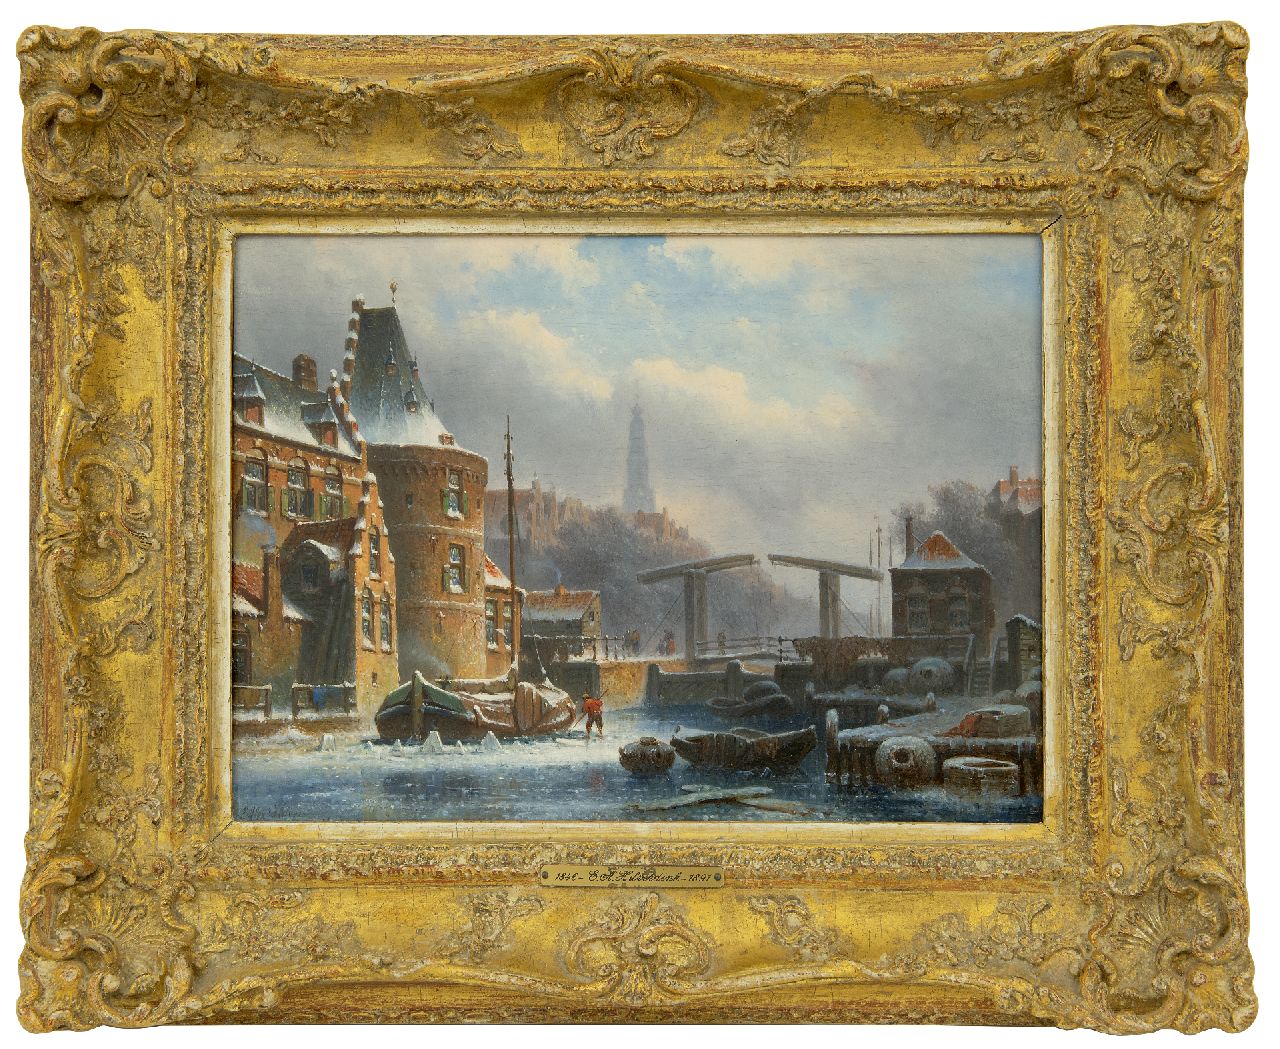 Hilverdink E.A.  | Eduard Alexander Hilverdink, Amsterdam canal in winter, oil on panel 23.2 x 31.5 cm, signed l.l. and dated '69